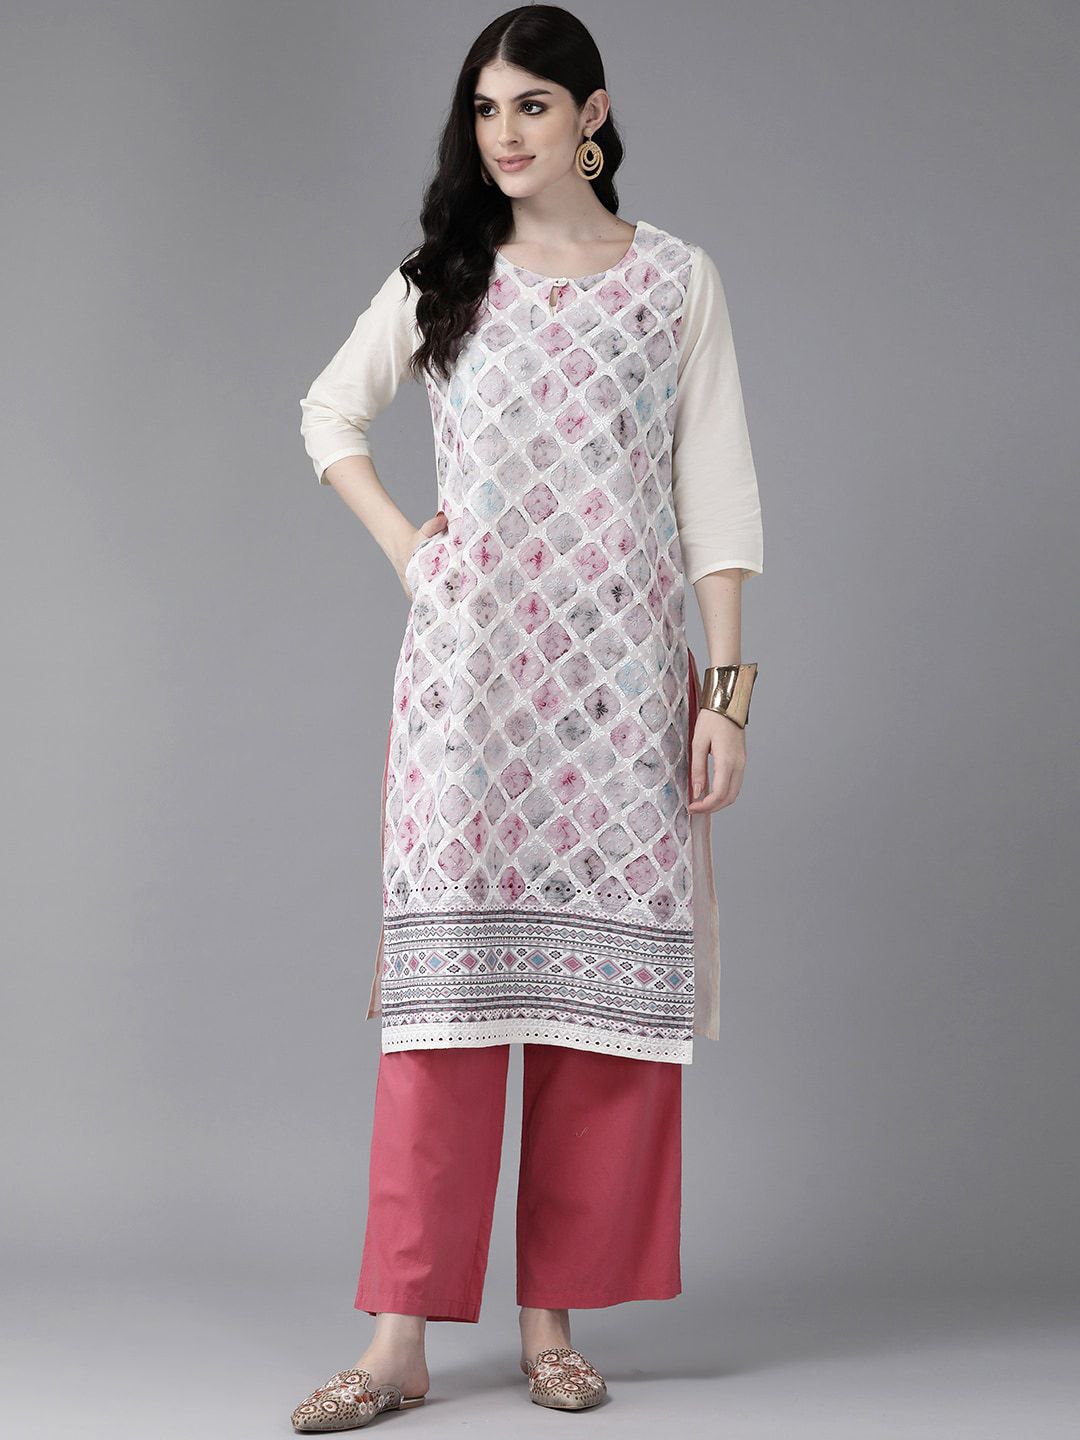 BAESD Floral Embroidered Cotton Kurta Price in India